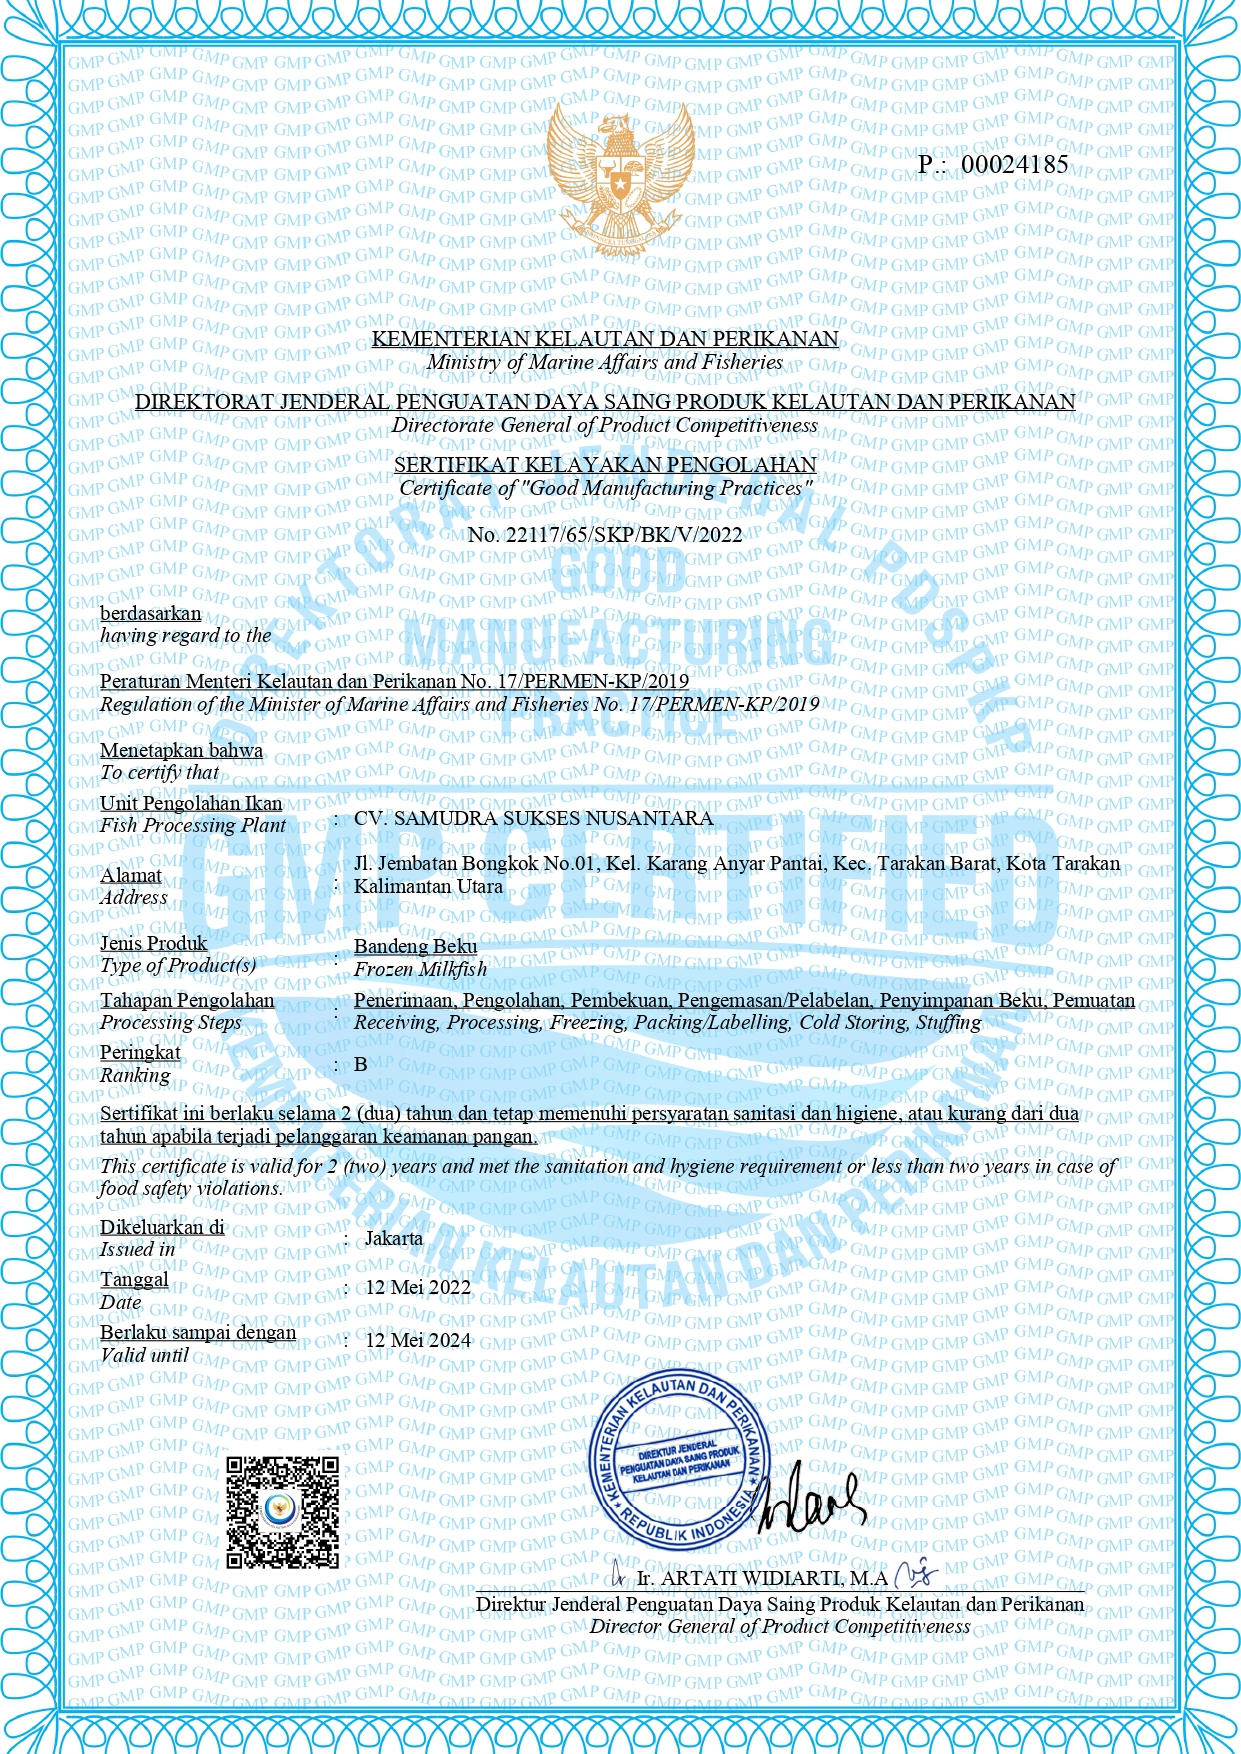 Certificate of "Good Manufacturing Practices" Milkfish Frozen